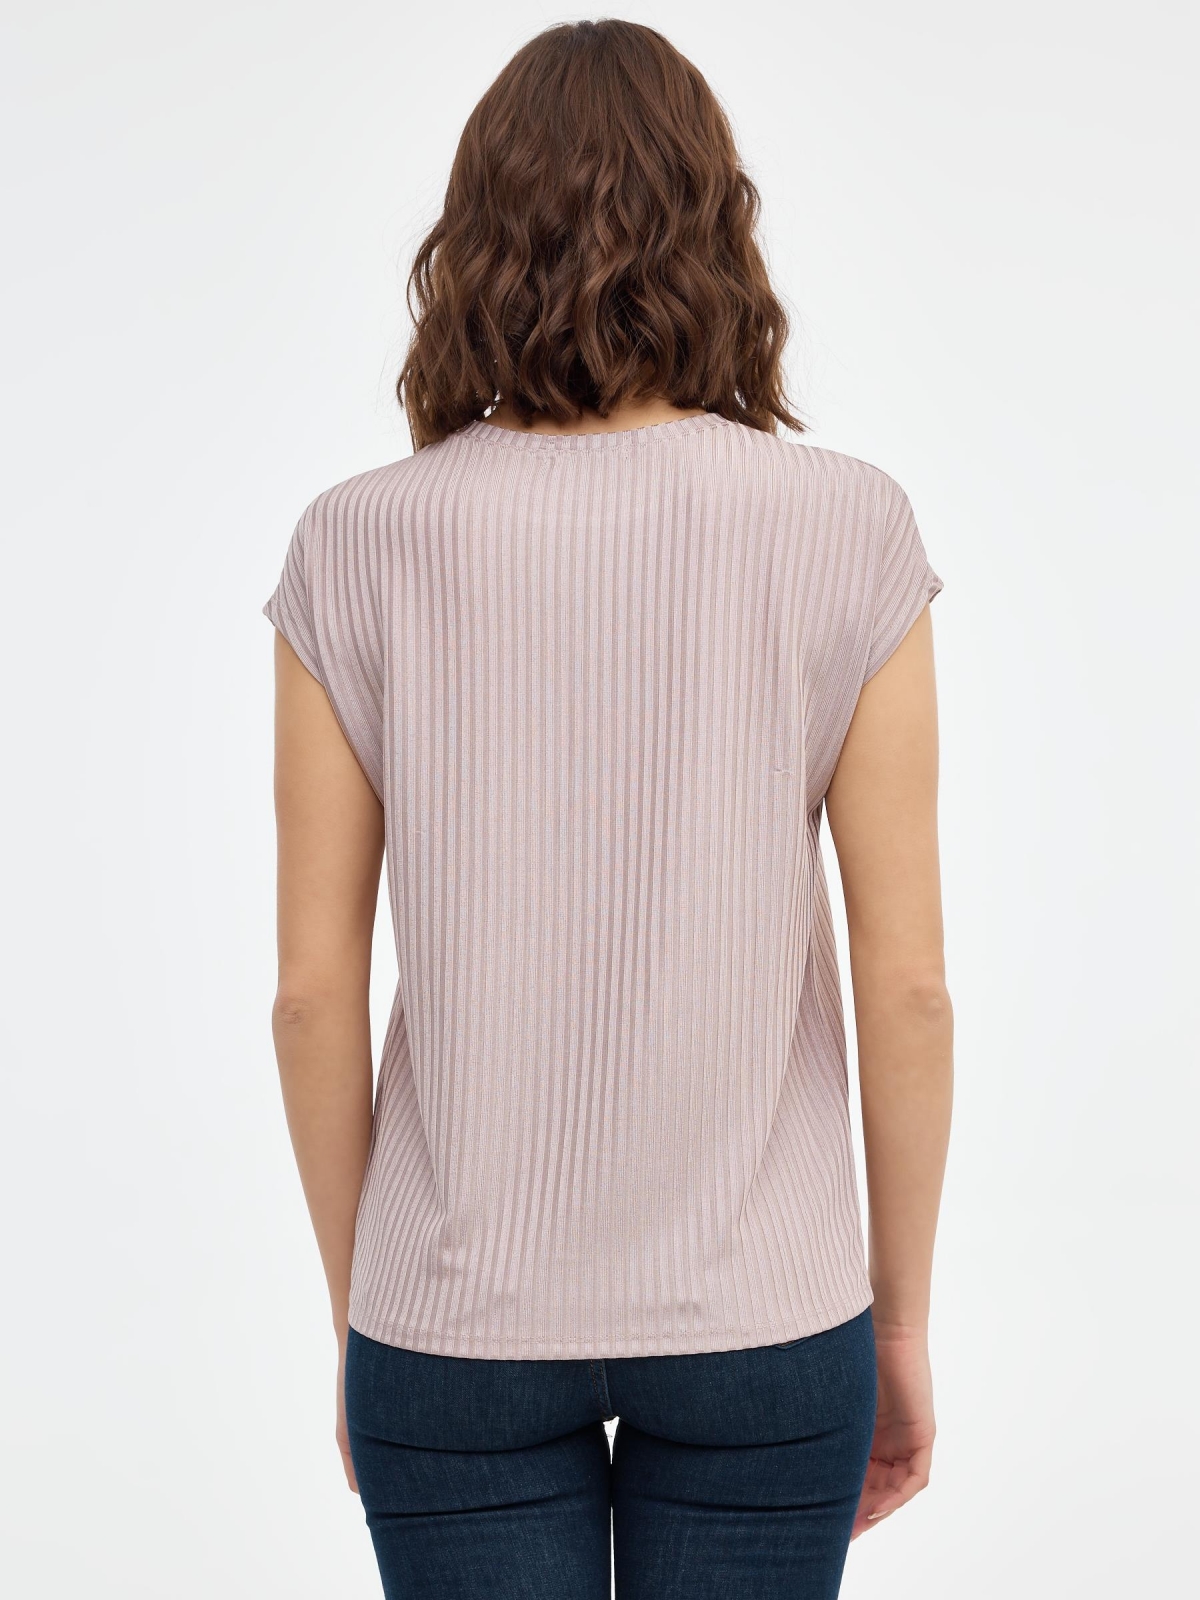 Textured woven T-shirt taupe middle back view